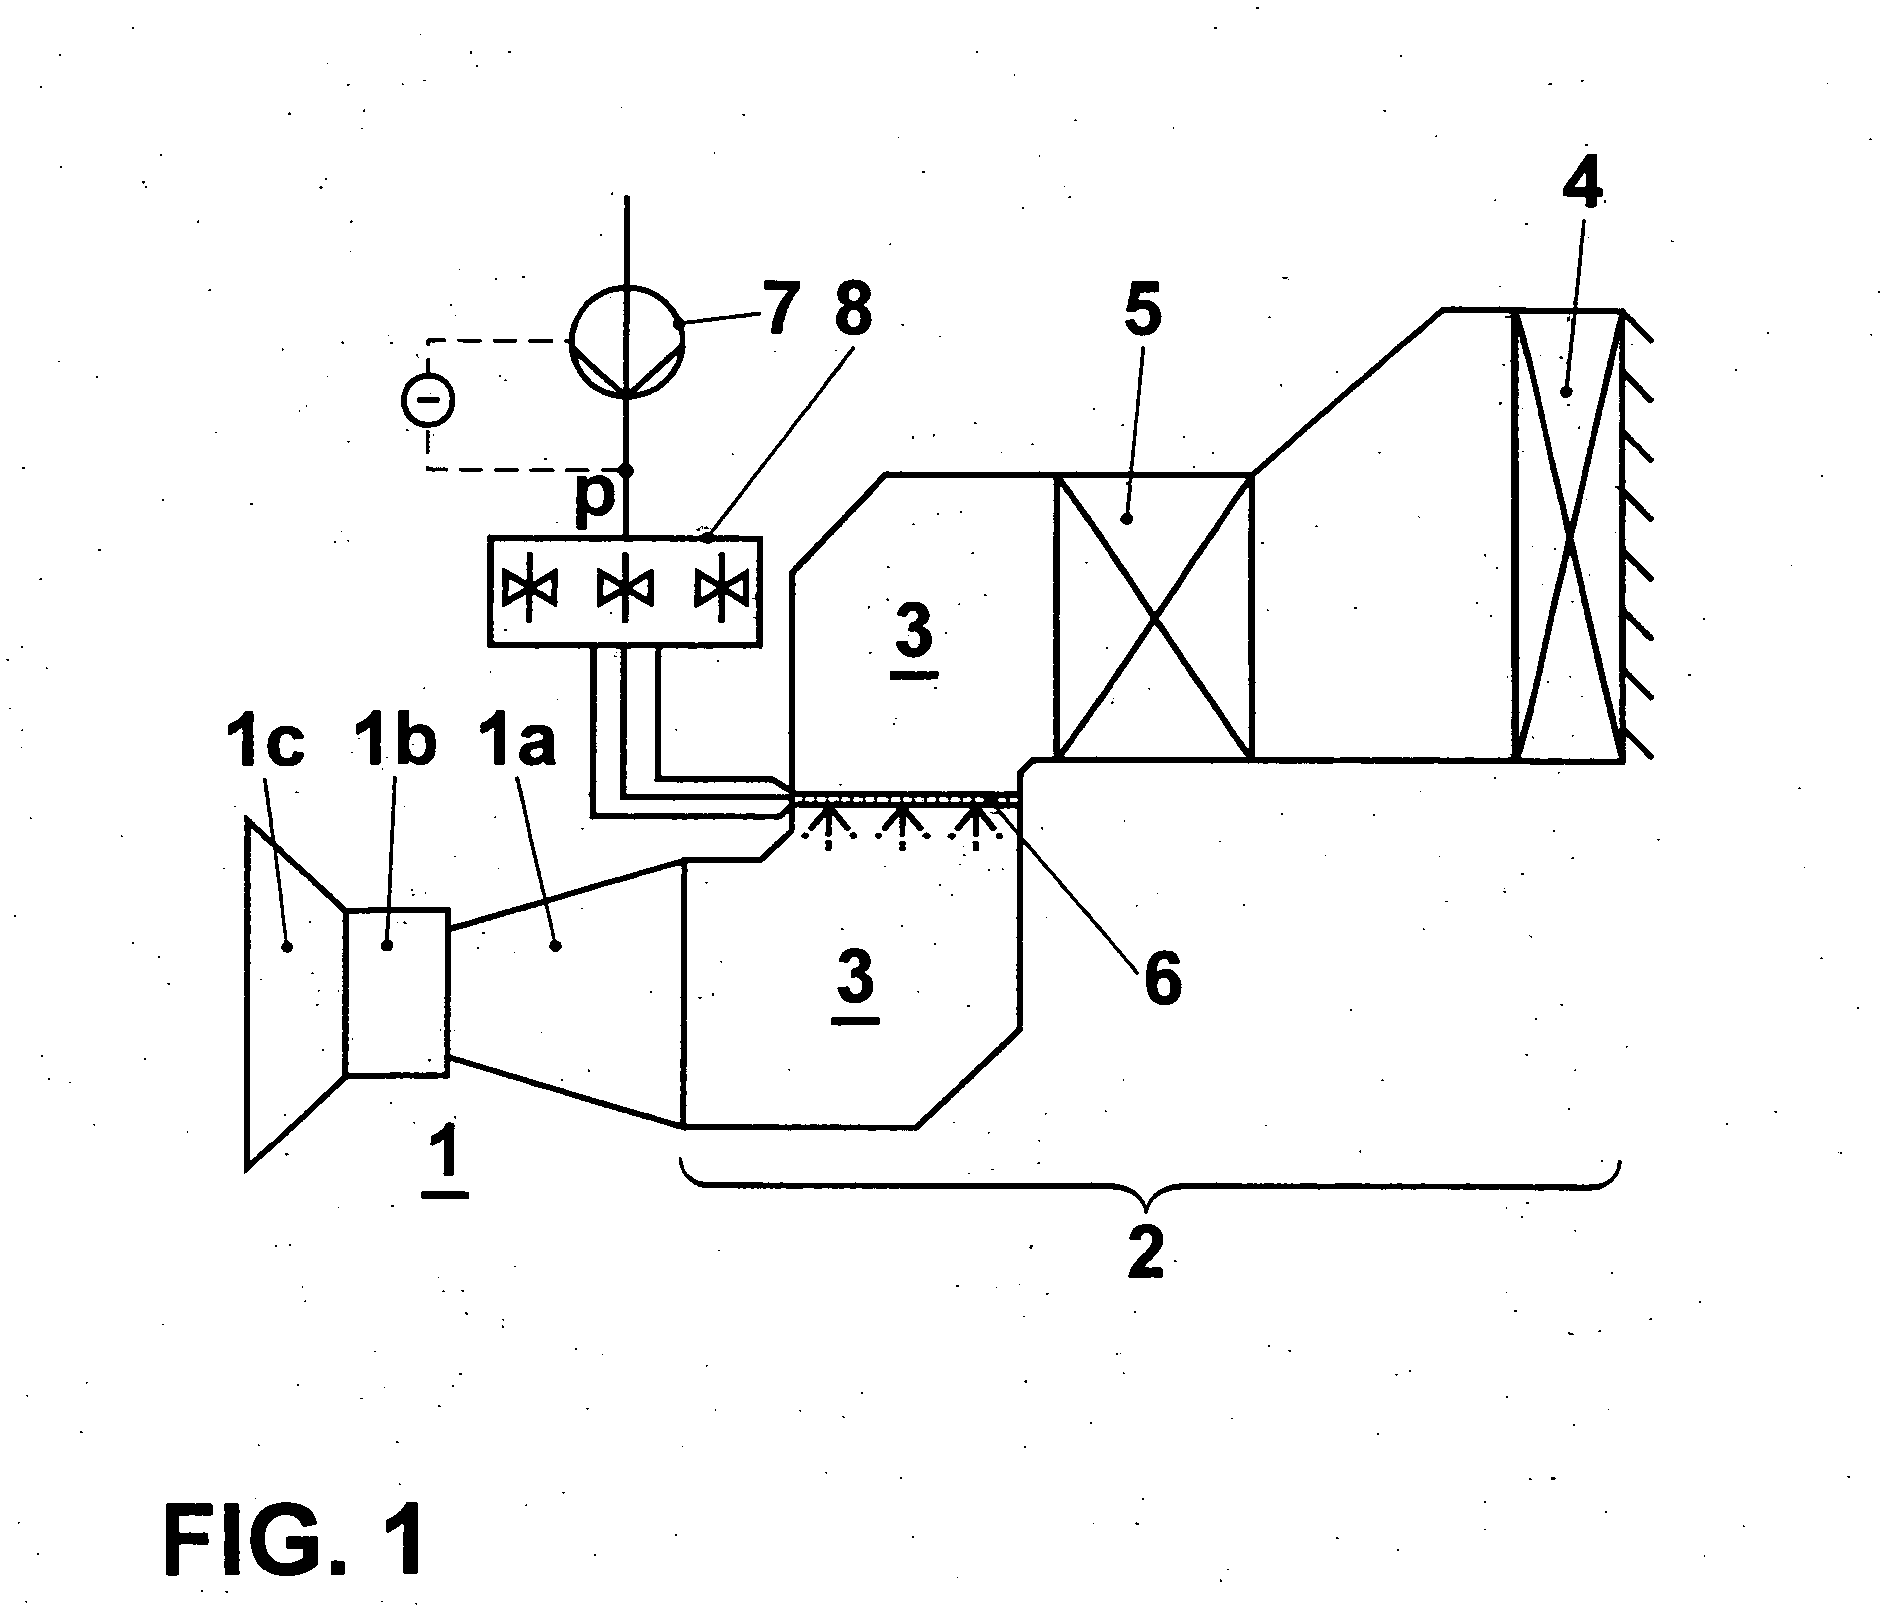 Method of controlling the injection of liquid into an inflow duct of a prime mover or driven machine